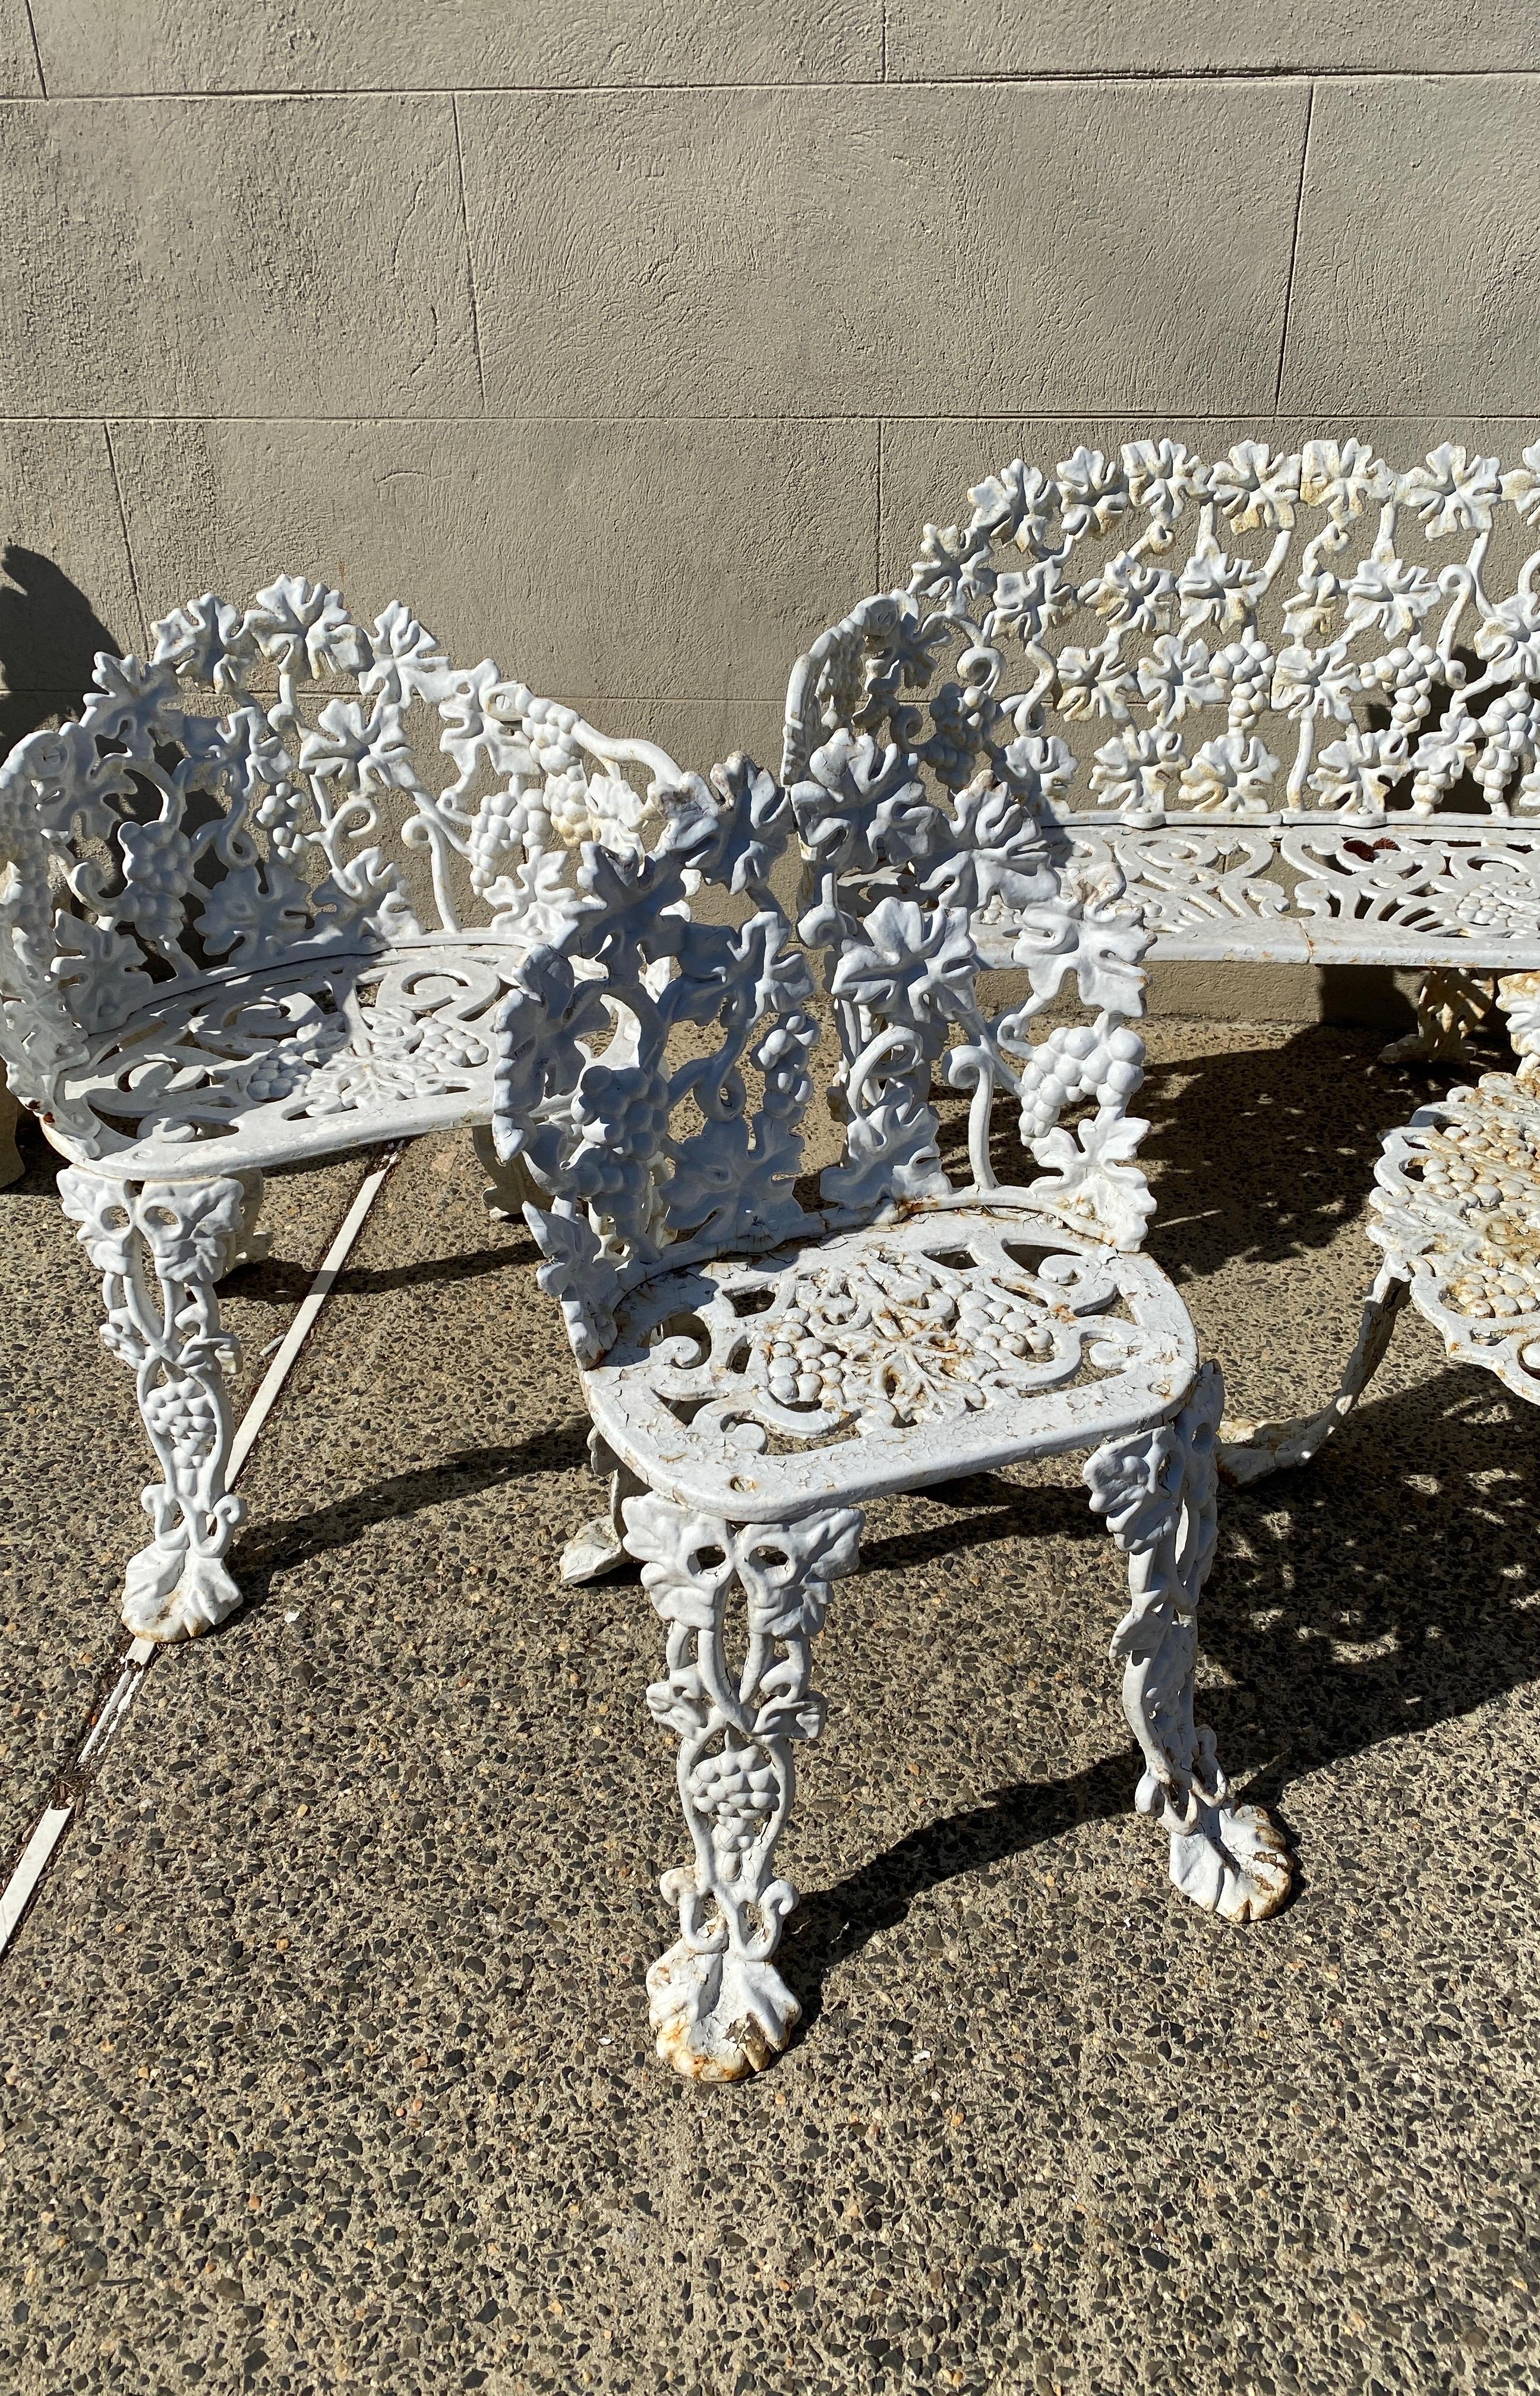 A hard to find six piece cast iron outdoor garden furniture set made by the Atlanta Stove Works The set includes a double settee, 2 larger barrel back chairs, 2 smaller side chairs and a round cocktail table. The original matching set with grape and